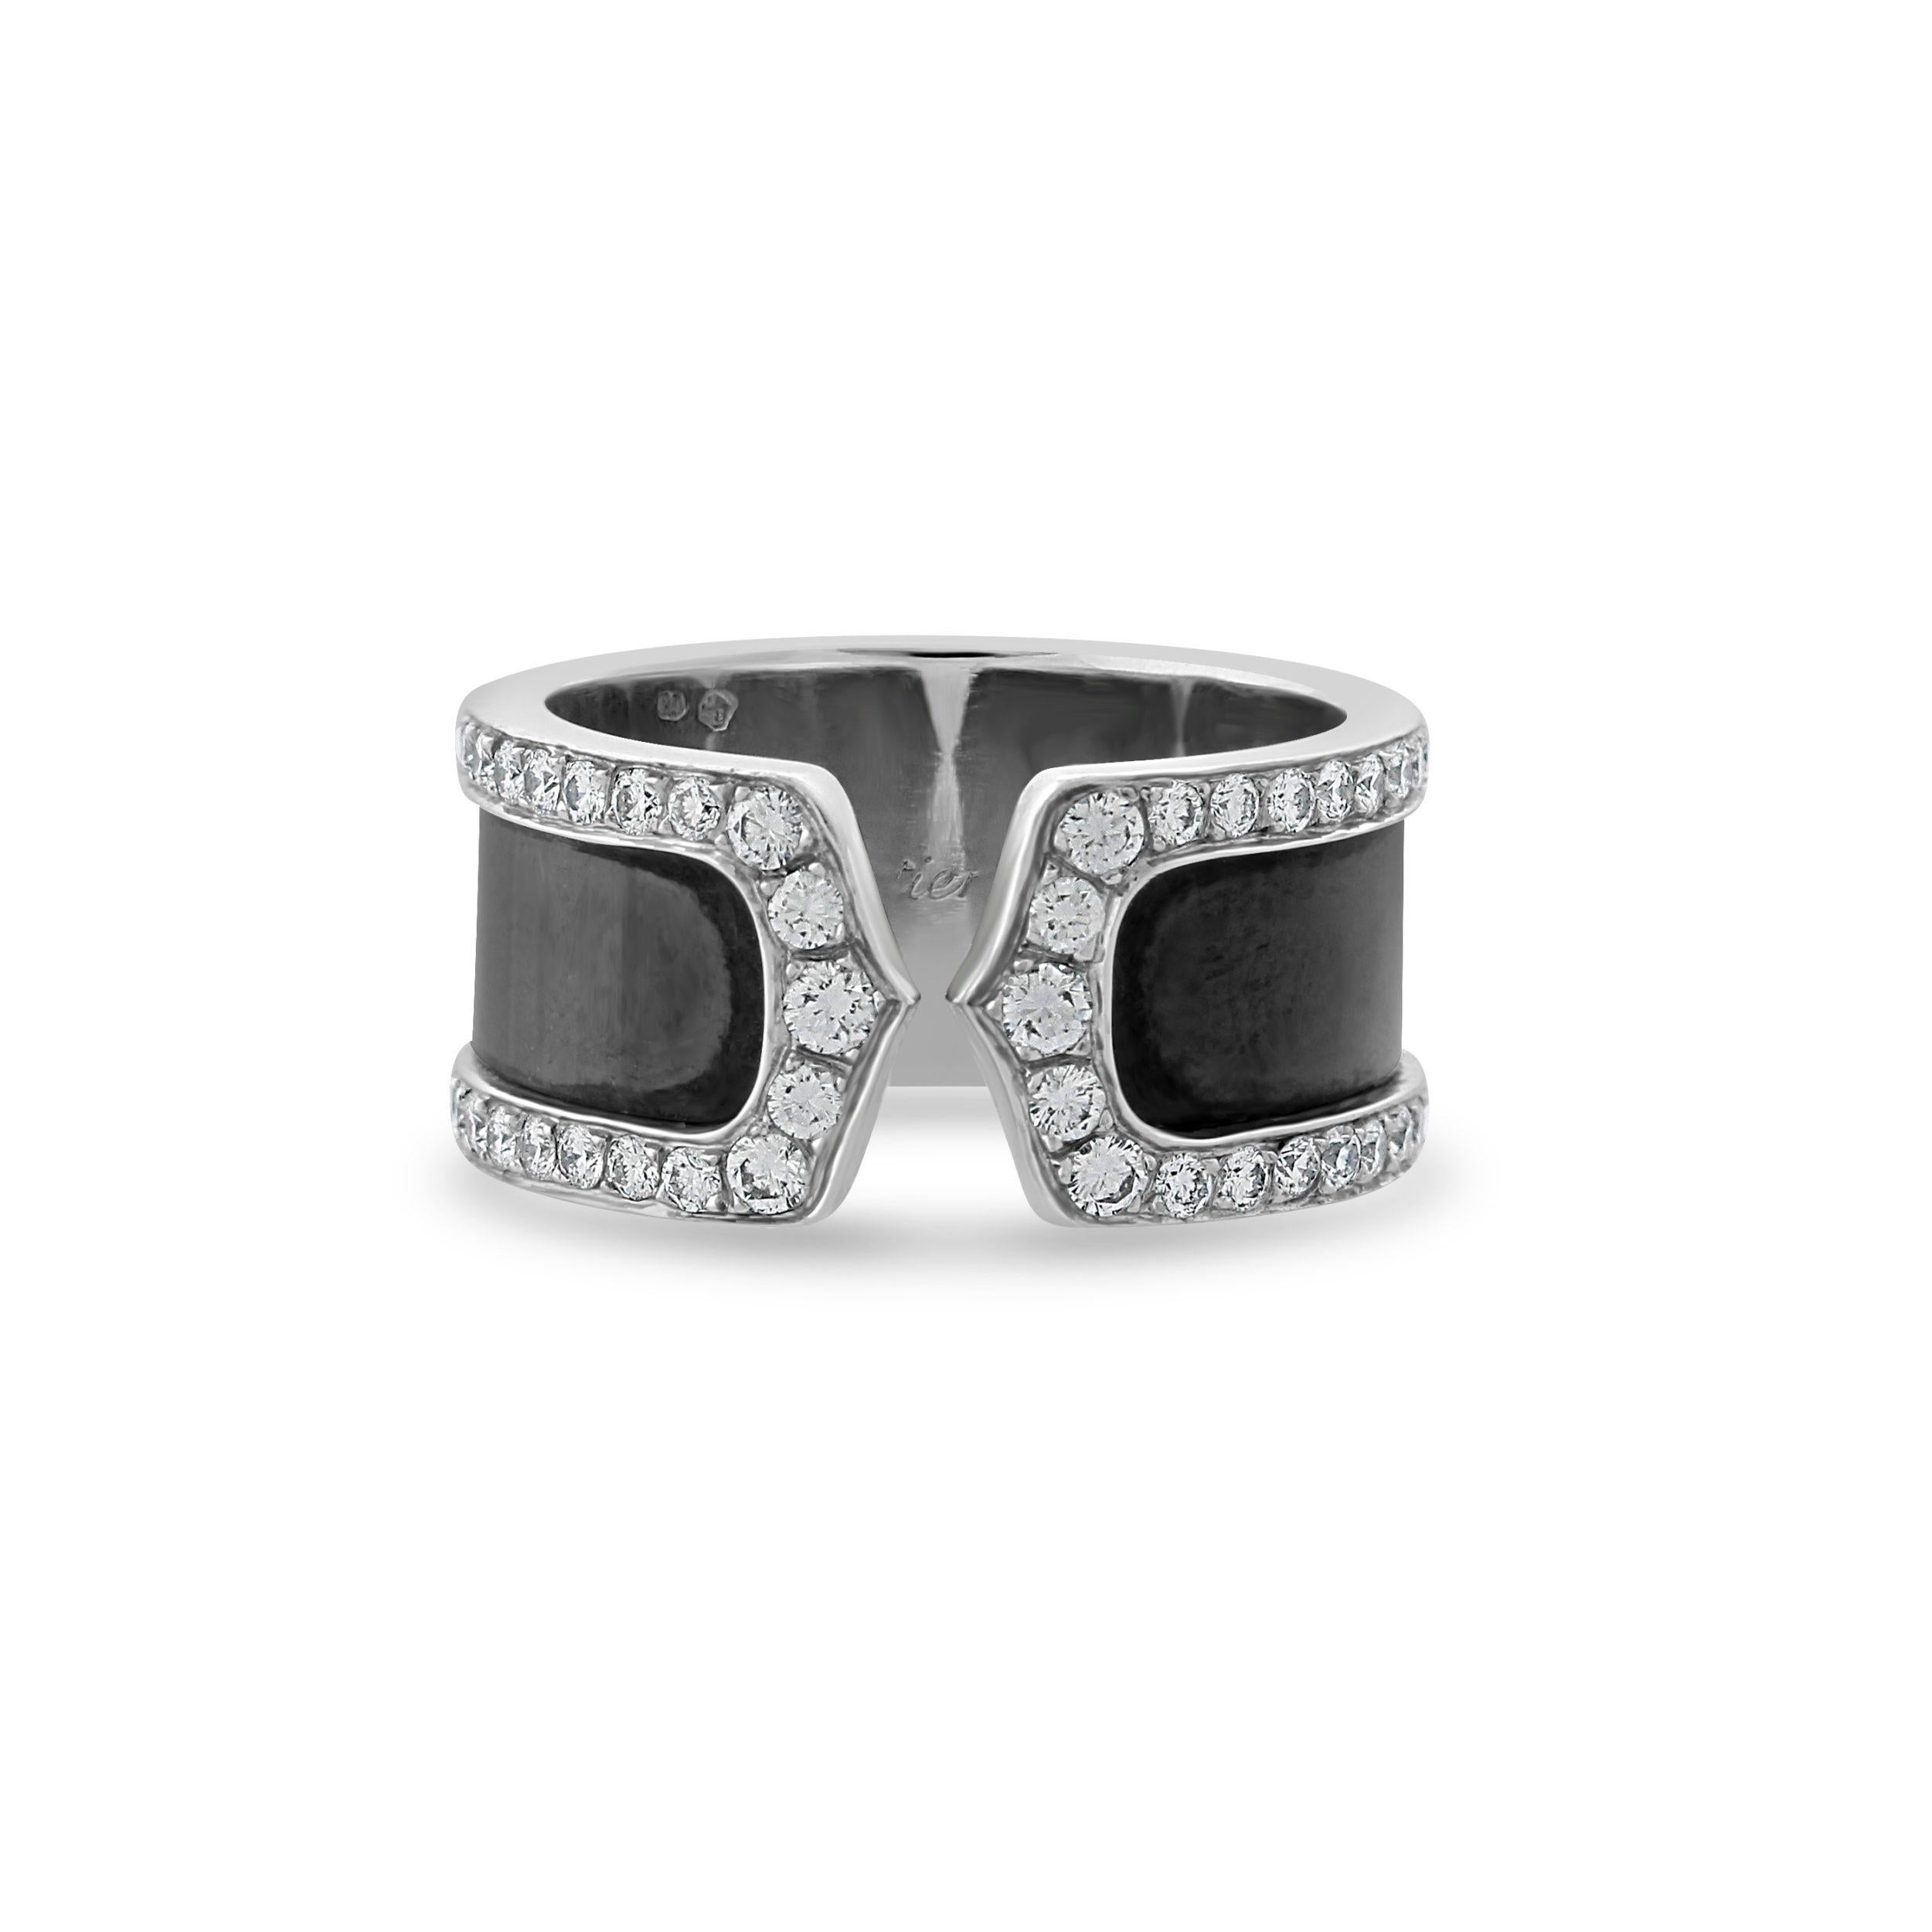 A classic contemporary ring by Cartier from the ‘Double C de Cartier’ collection. This 18k white gold ring is set with approximately 1.25 carats of brilliant cut diamonds framing the black lacquer centre converging on the iconic two C’s. The ring is